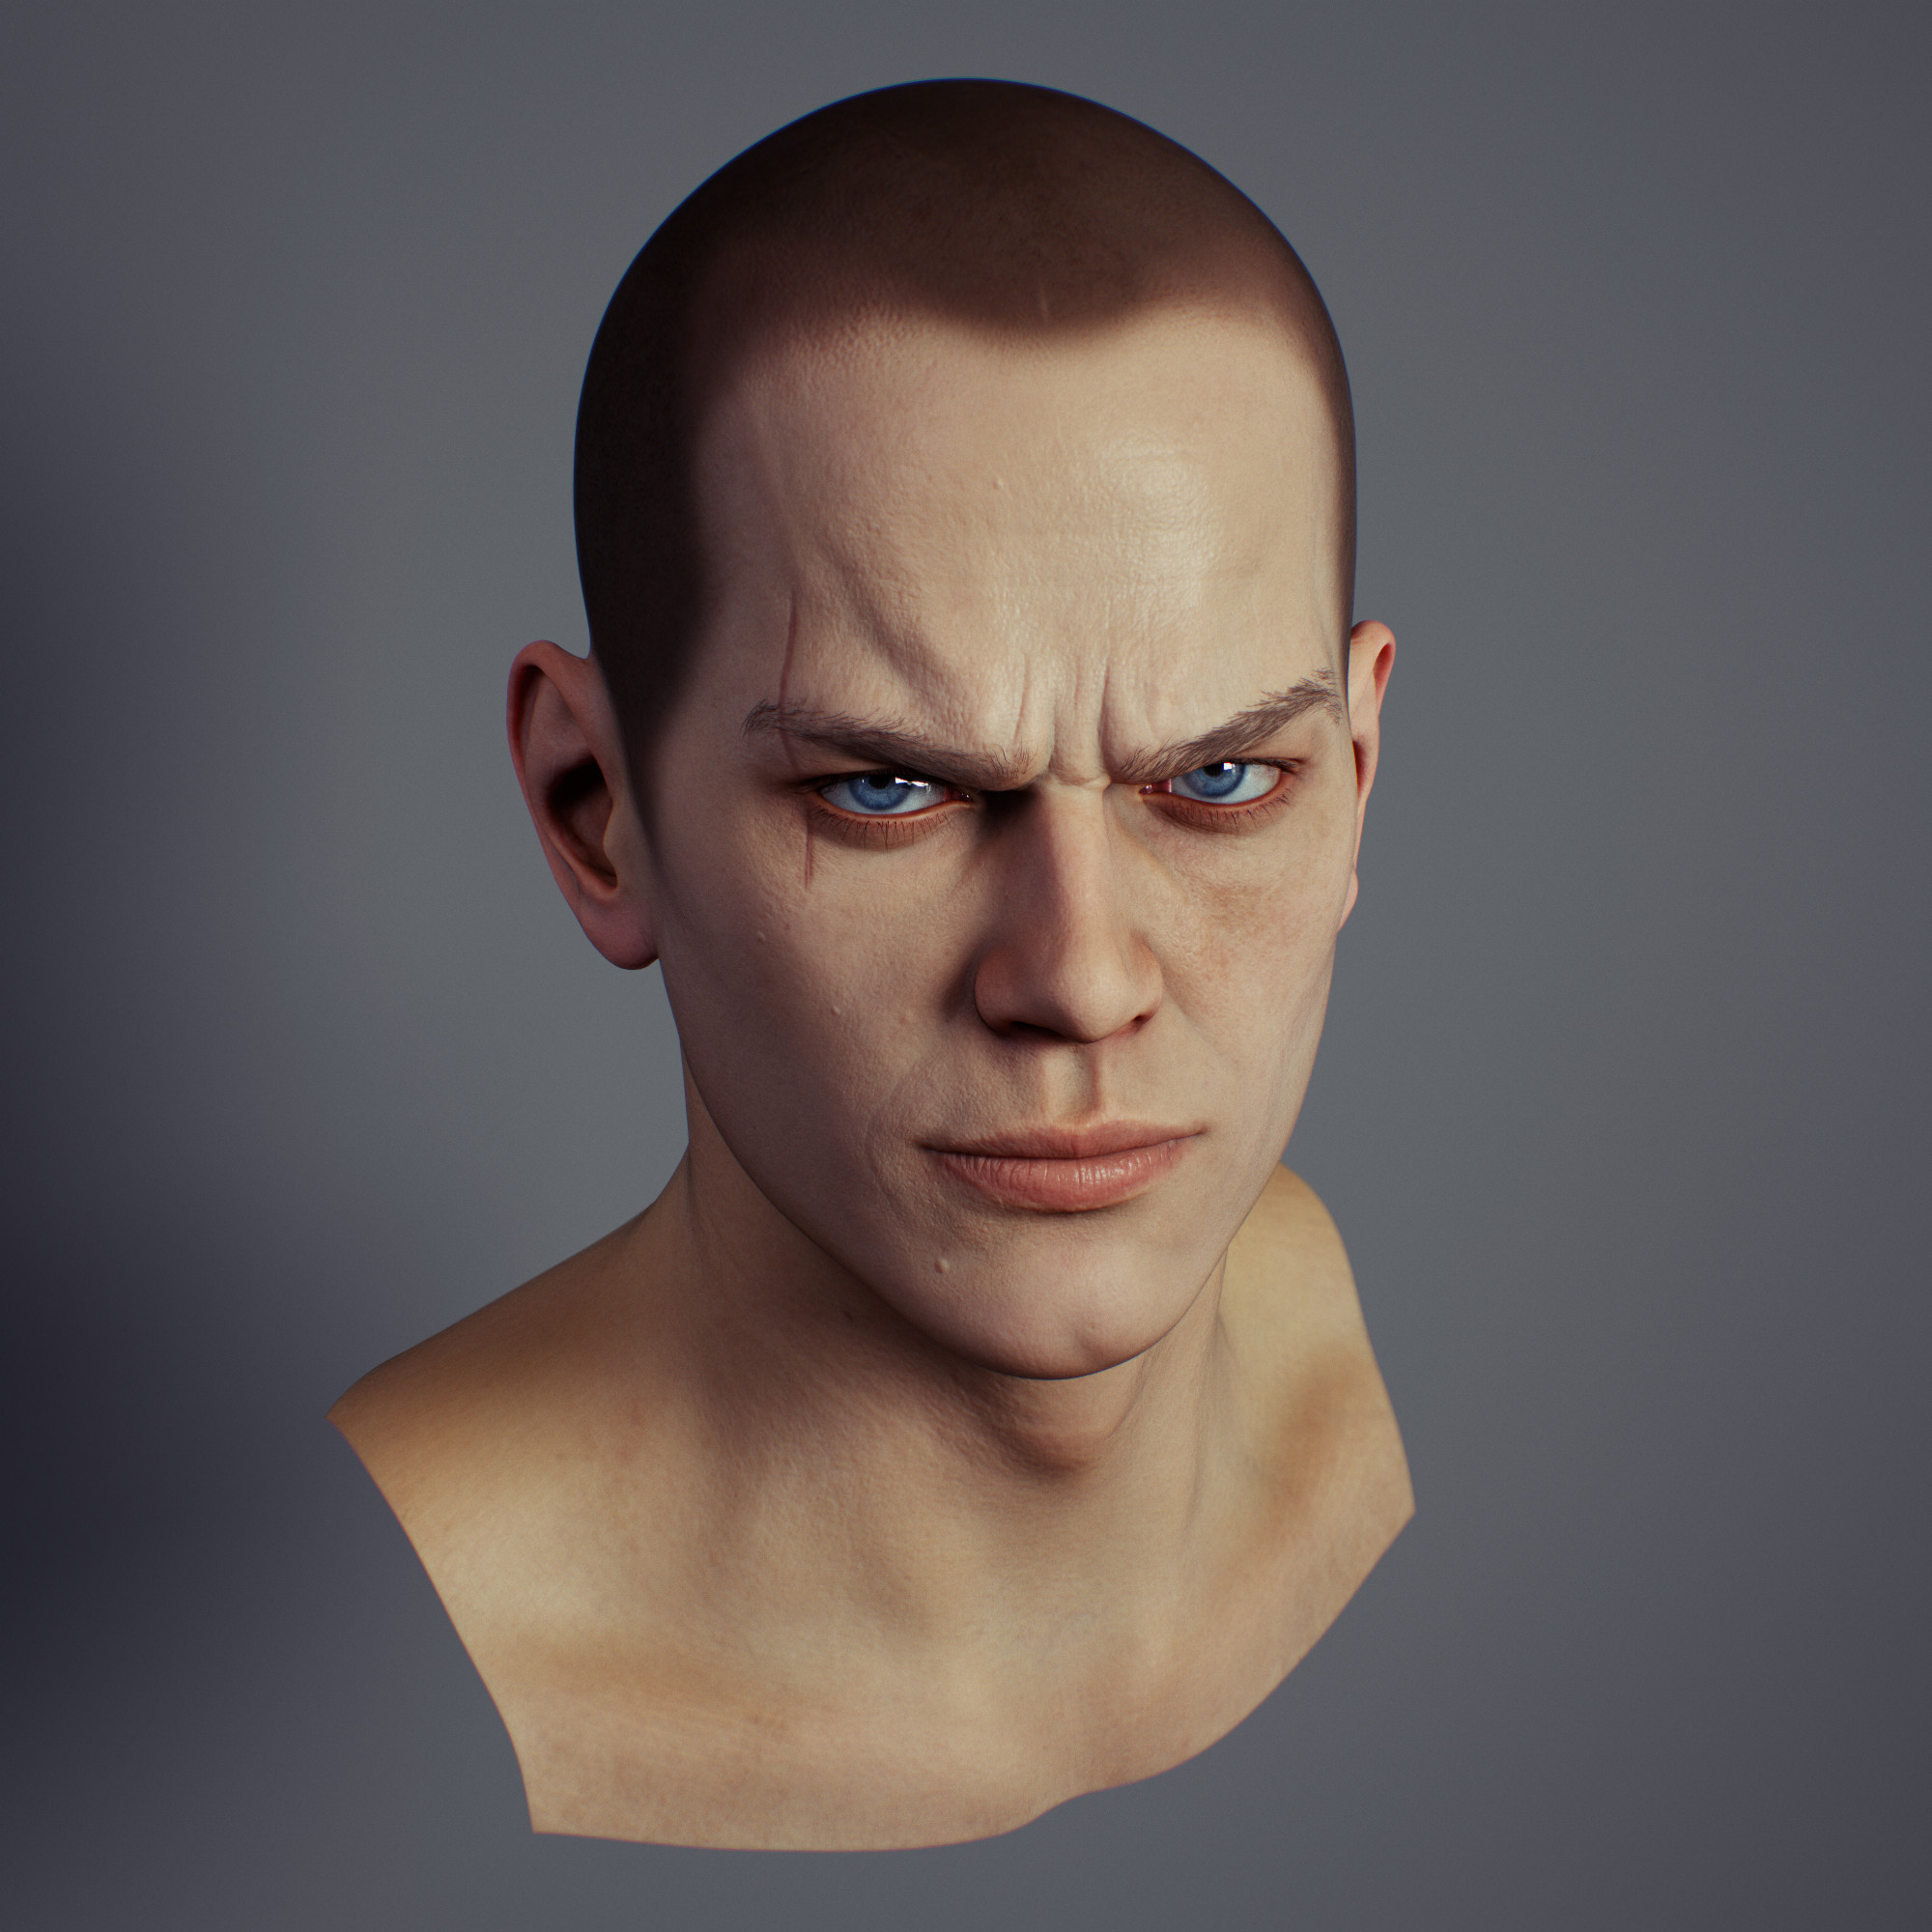 Texture test before adding hair. 